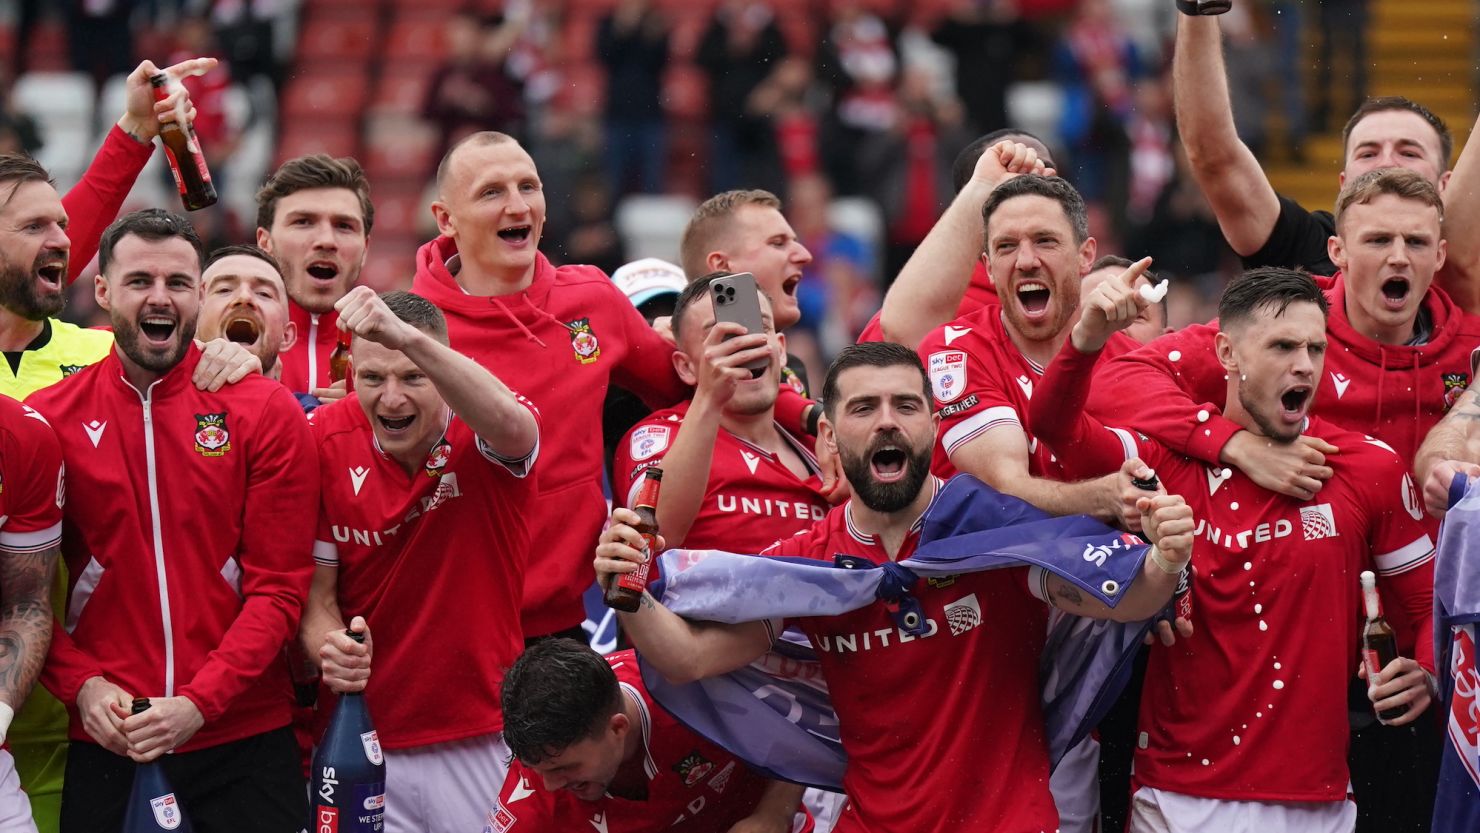 Wrexham players on the pitch celebrating promotion to League One after the final whistle.